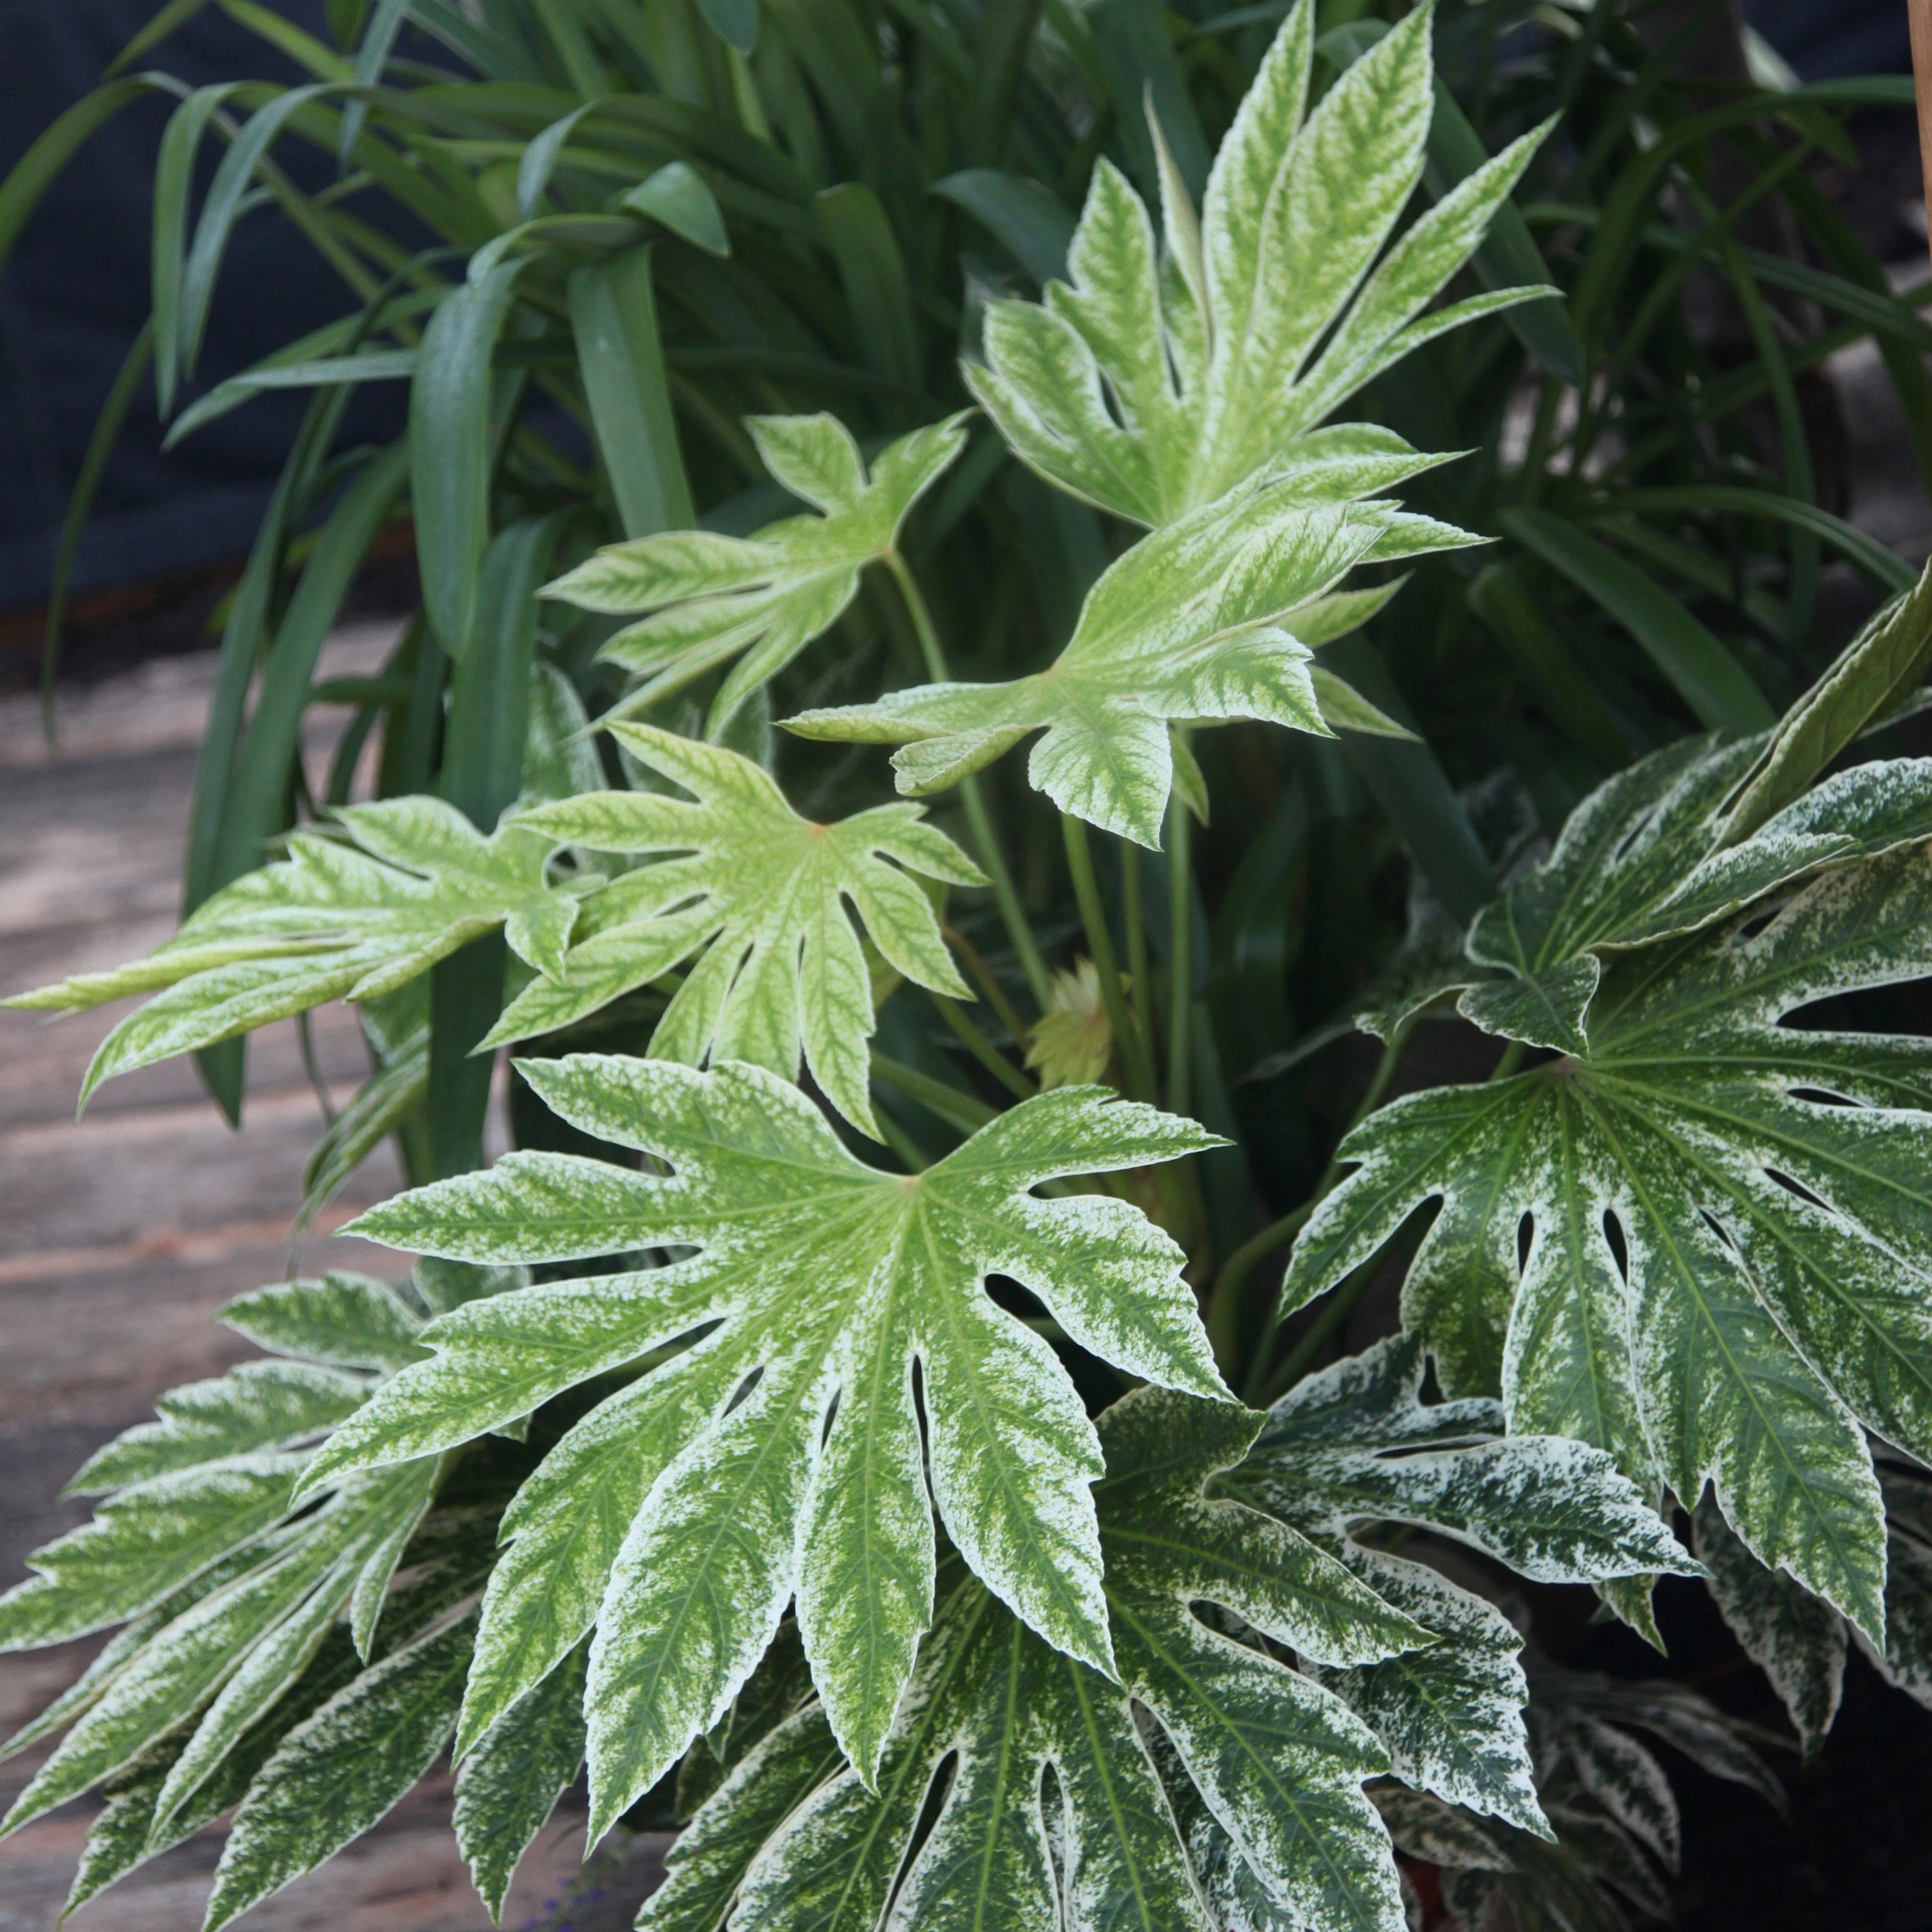 Selected Instant Impact Plants: 25% off